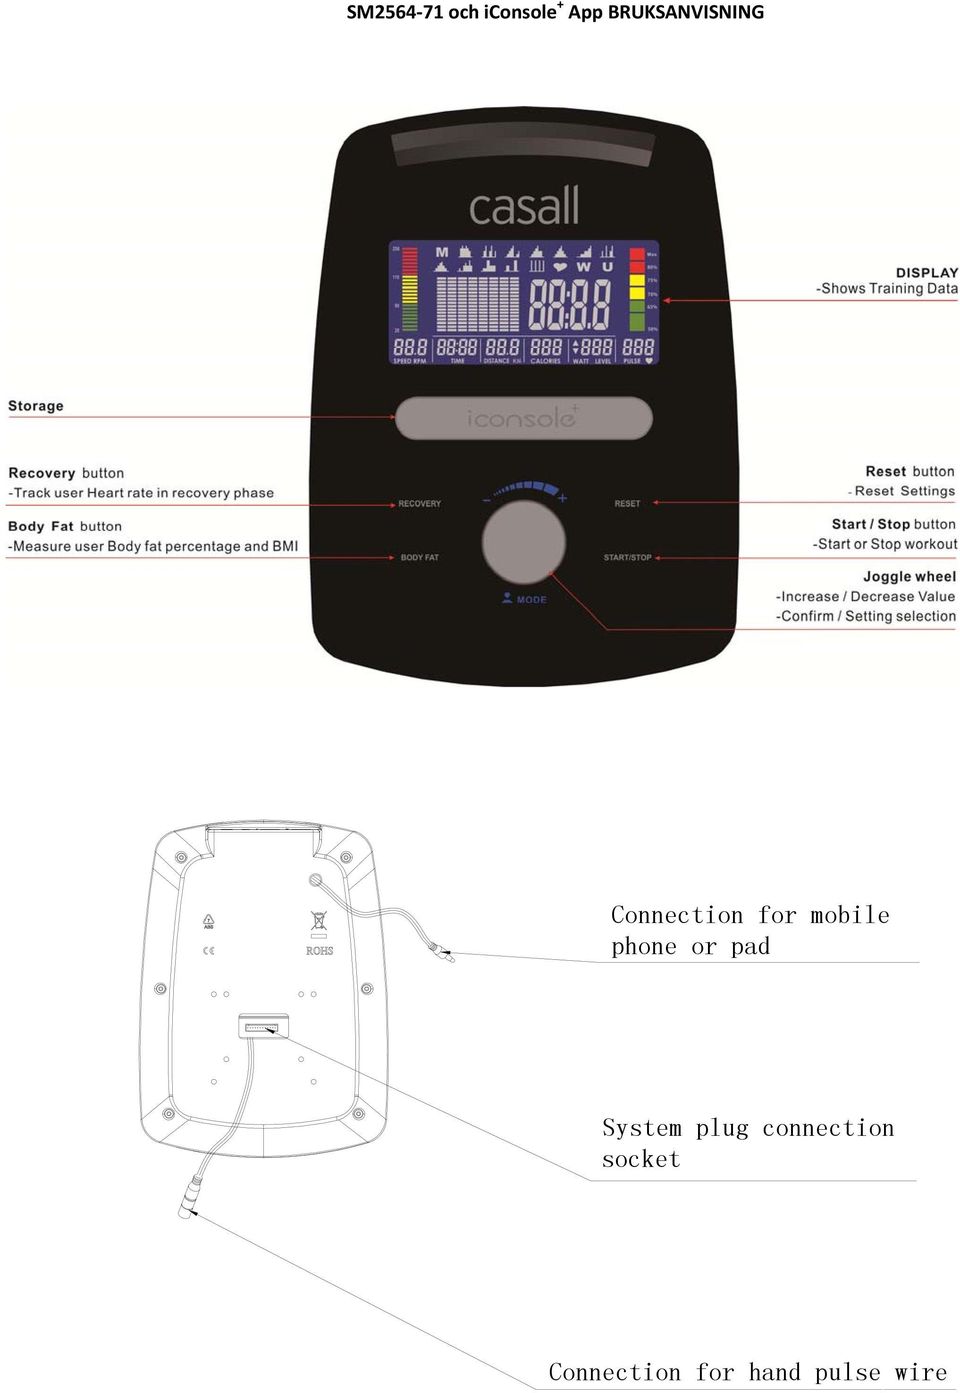 mobile phone or pad System plug